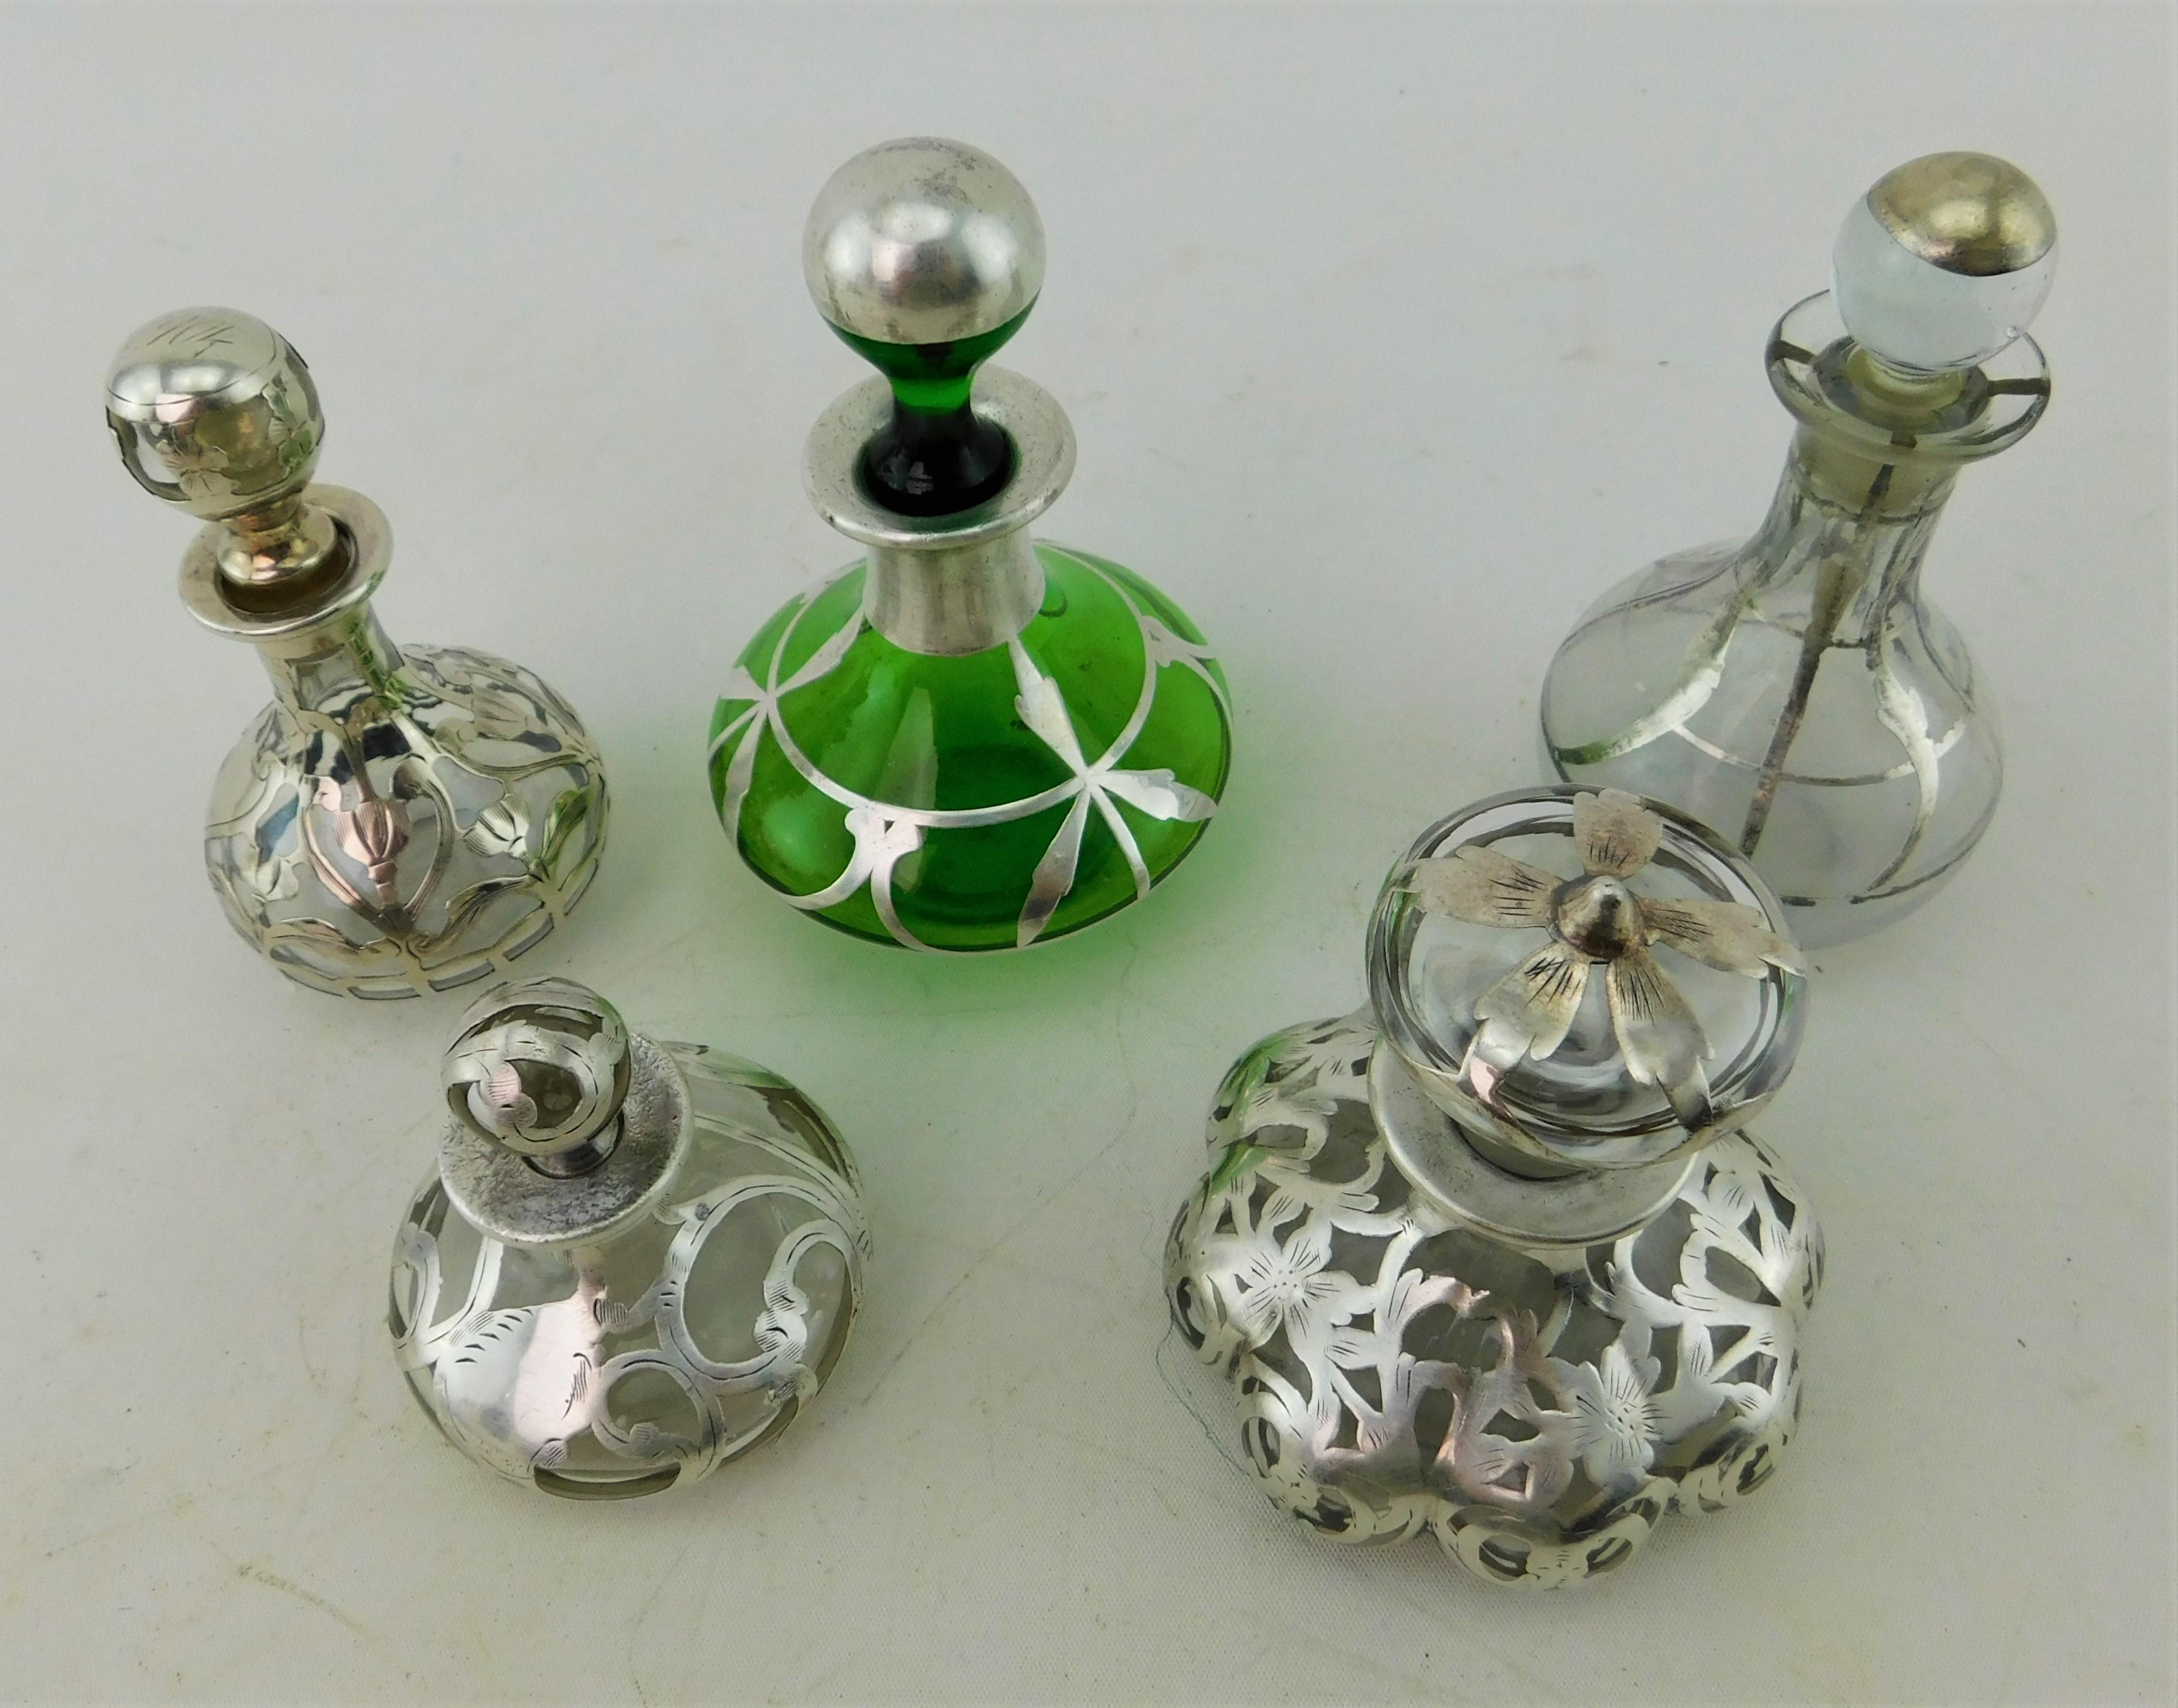 Five Art Nouveau Perfume Bottles circa 1900 Silver Overlay on Glass 19th Century In Good Condition For Sale In Hamilton, Ontario